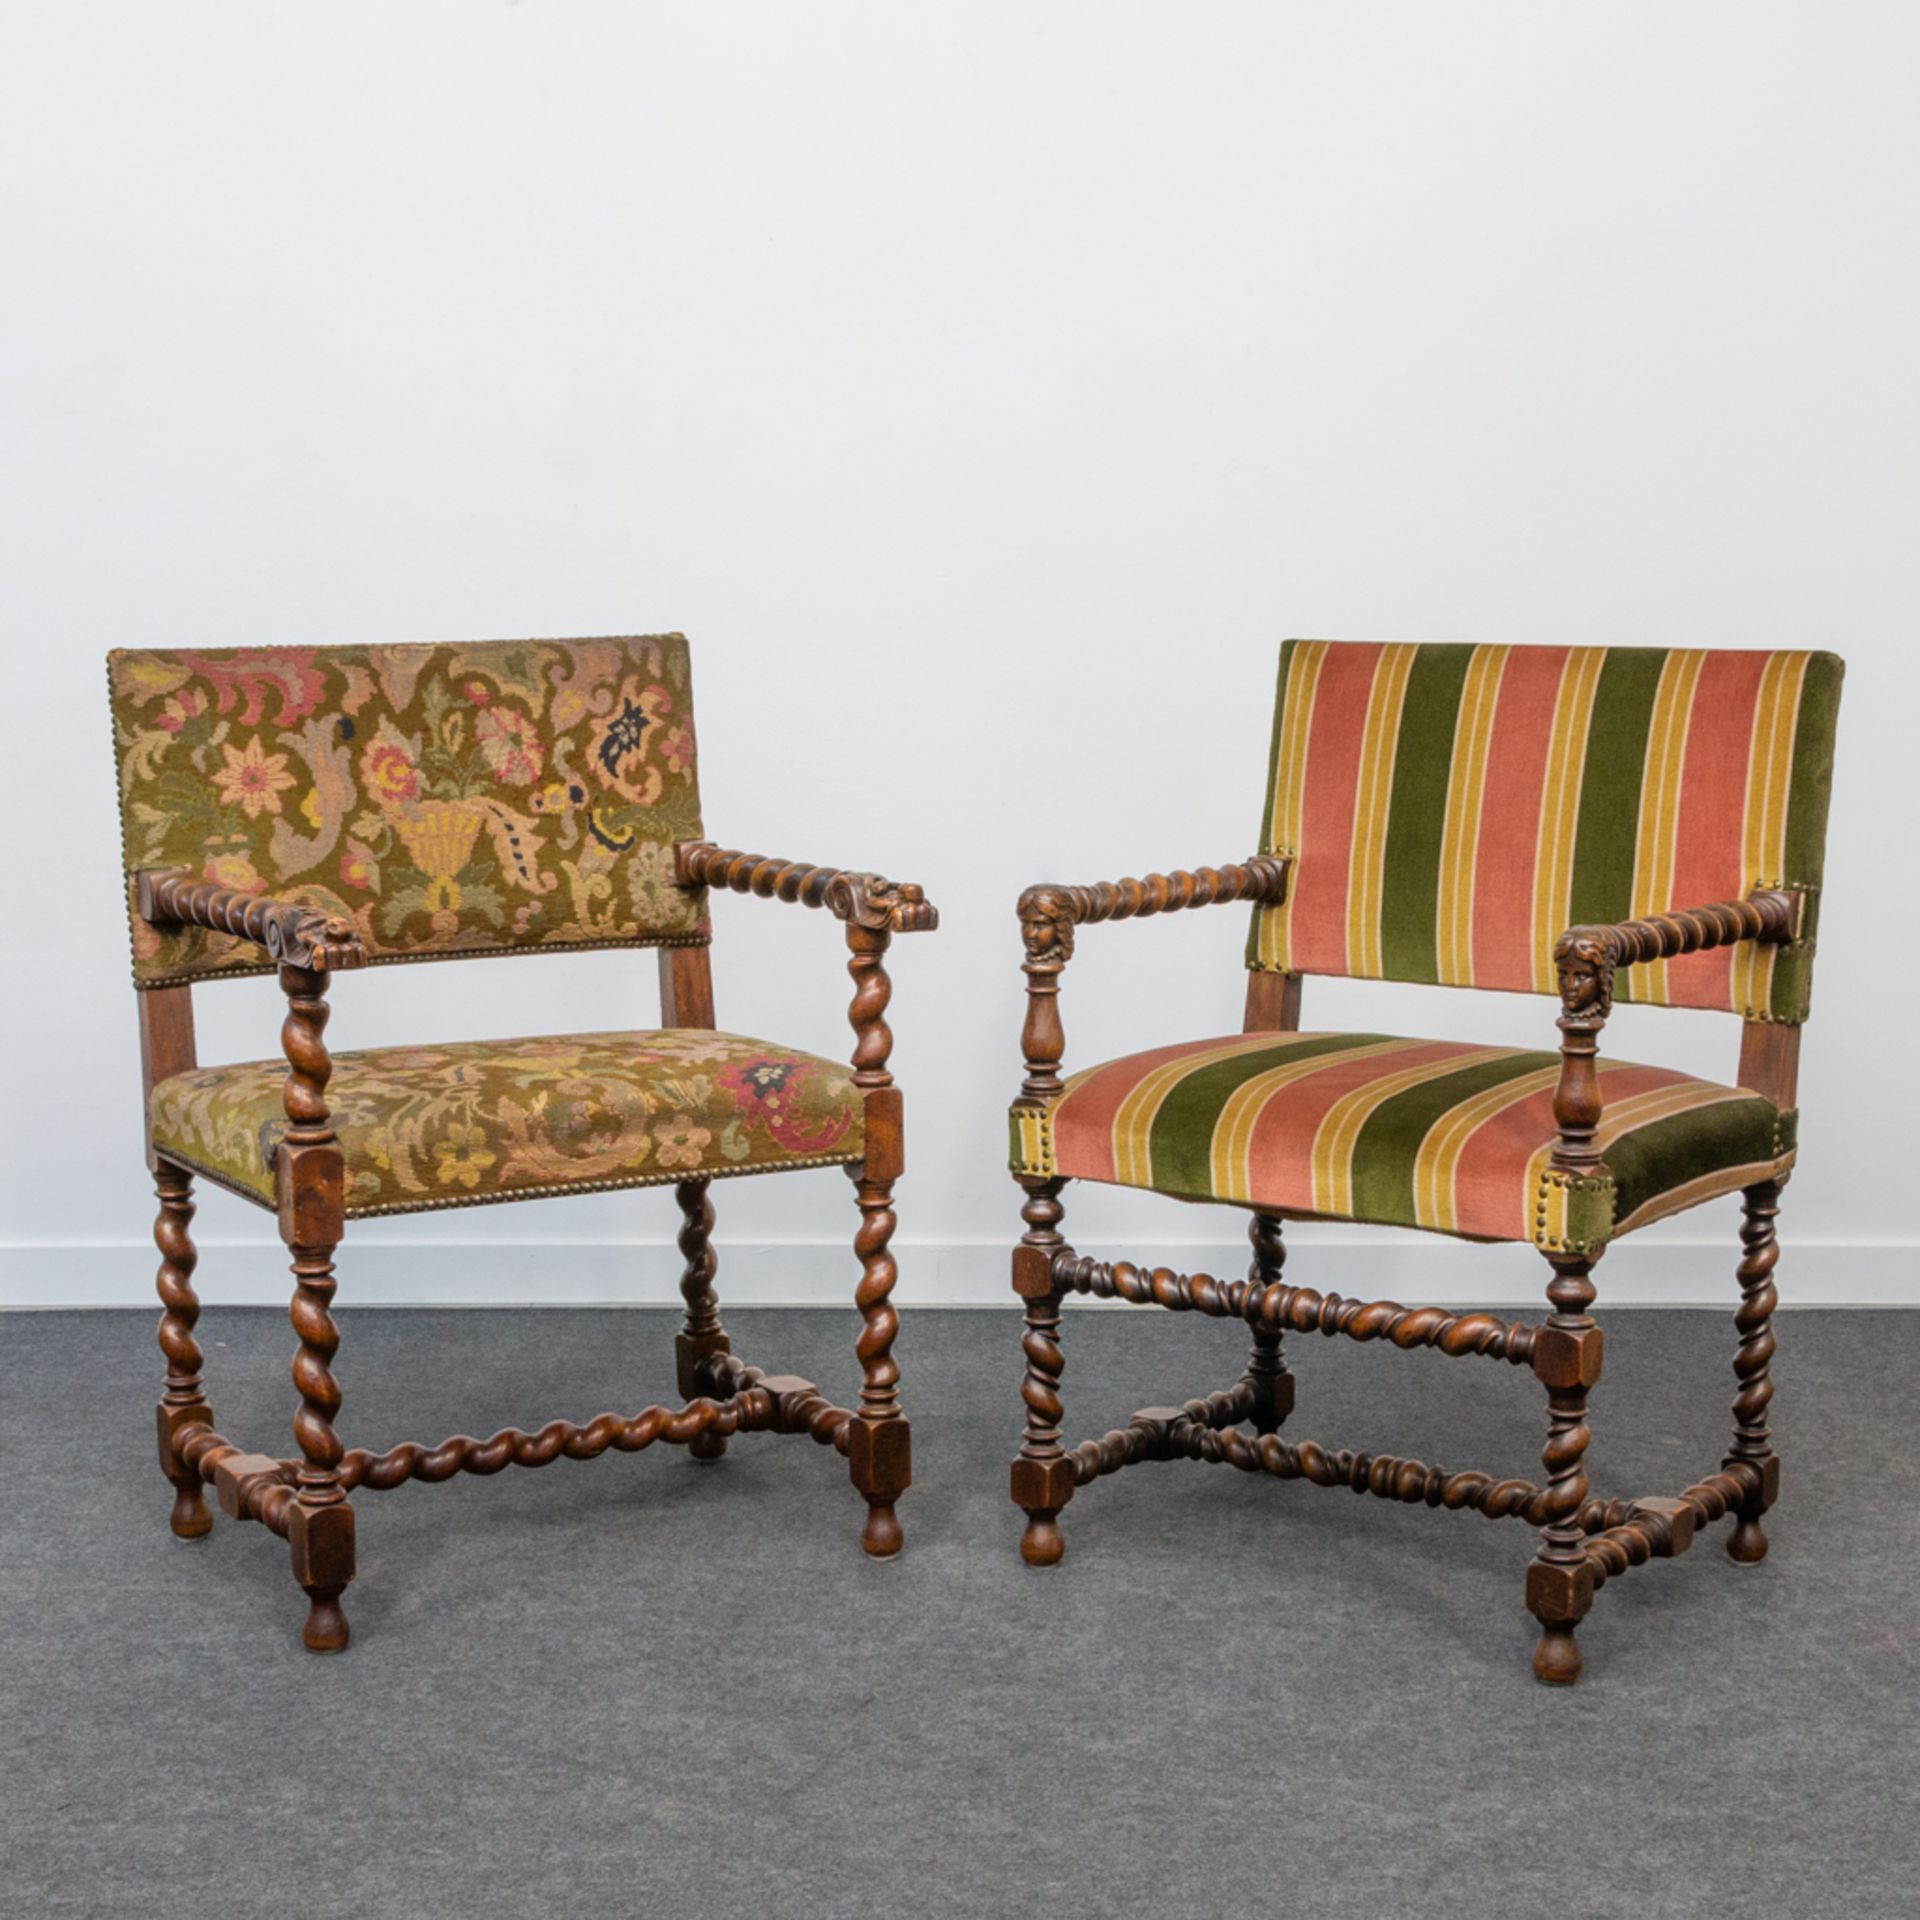 A collection of 2 castle chairs with sculptured handles. 19th century. (92 x 63 x 54 cm)